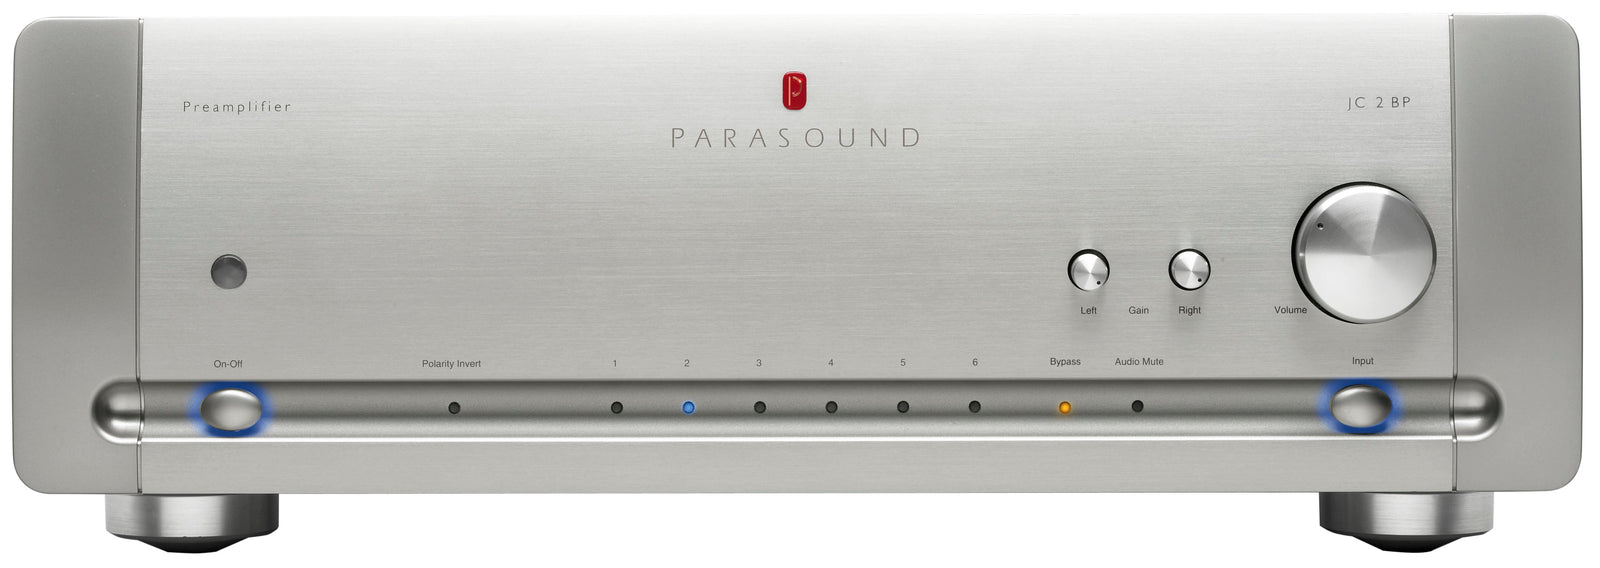 PARASOUND HALO JC 2BP PREAMPLIFIER - With a great sound into stunning packages, find all Parasound model Halo P 6 - Model Halo JC 5 - A51 - A52+ - JC 2 BP - Zpre3, A 21+ Stereo Power Amplifier, Amplifier, Mono Power Amplifier, Phono Preamplifier, Integrated Amplifier & DAC, Speaker Amplifier and more available at Vinyl Sound. We have mastered the art of assembling audio systems capable of reproducing music so perfectly, providing you with emotional experiences and satisfaction for many years to come...